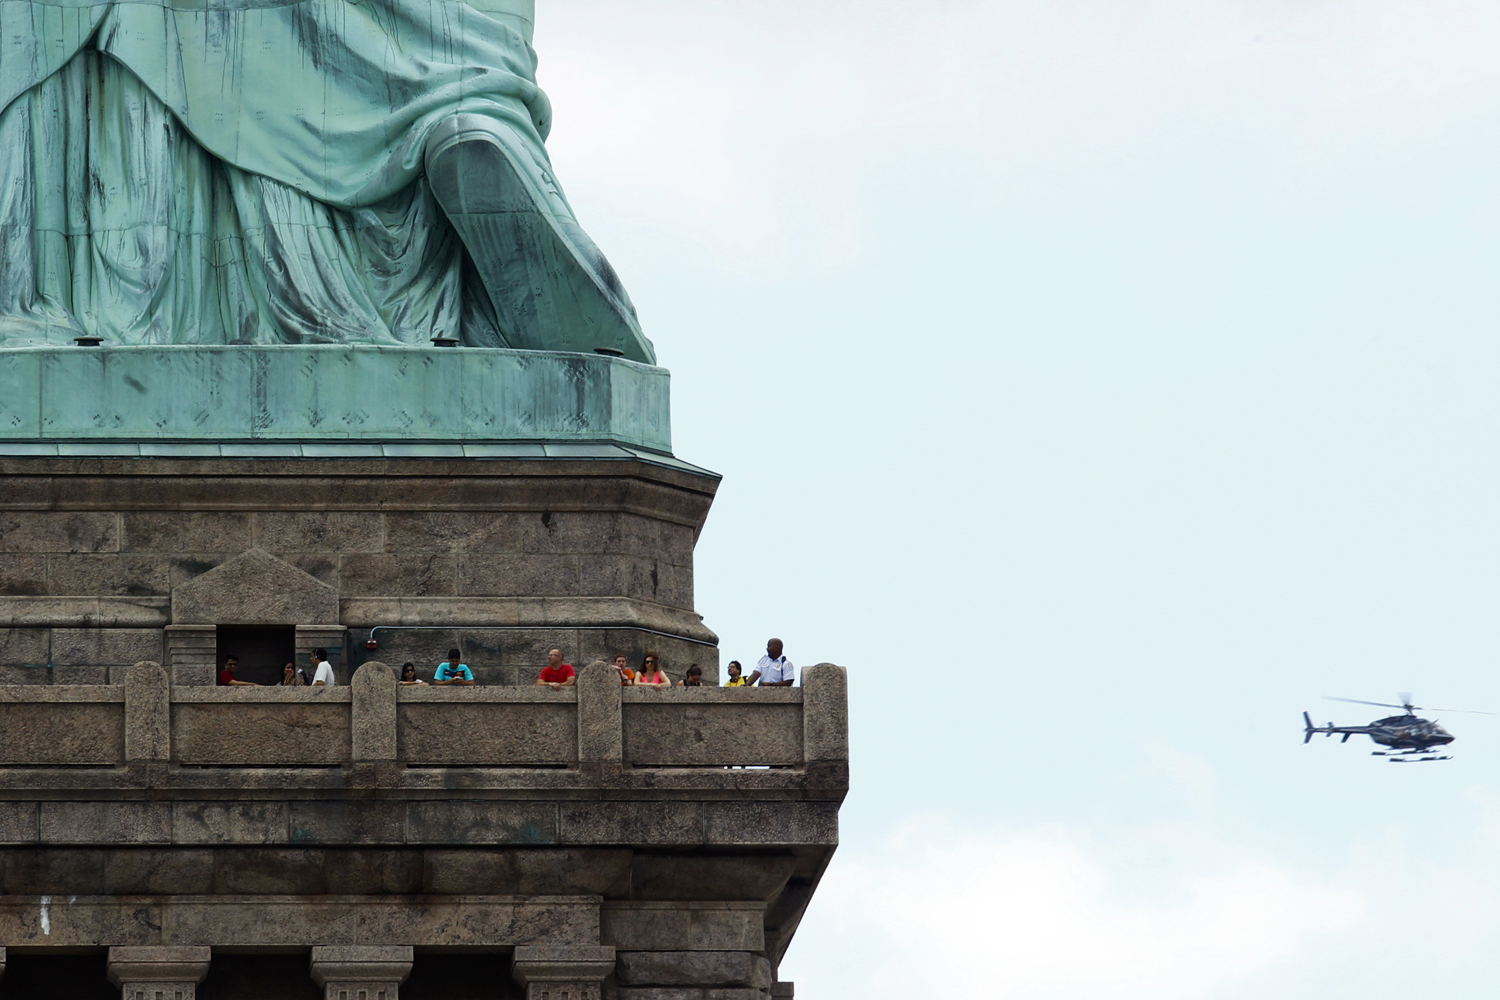 People visit the Statue of Liberty during the reopening ceremony in New York